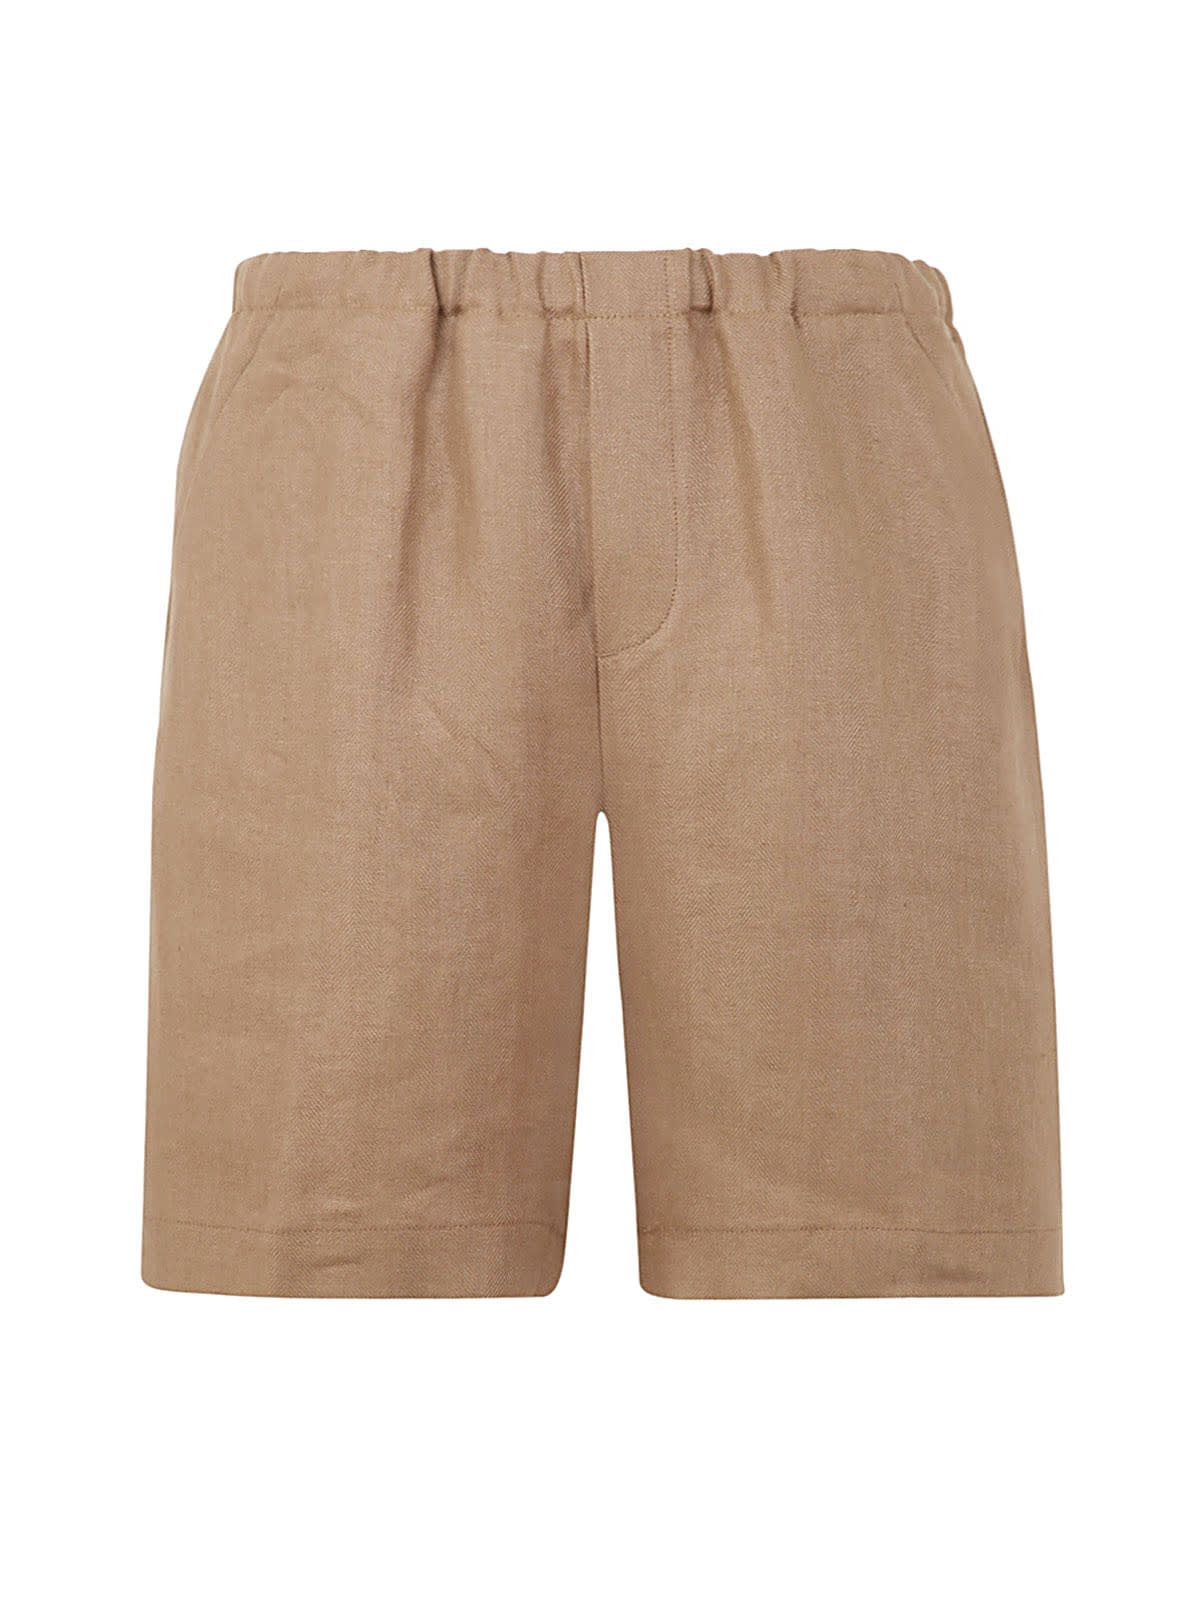 Nine In The Morning Alexios Short Man Pants In Taupe